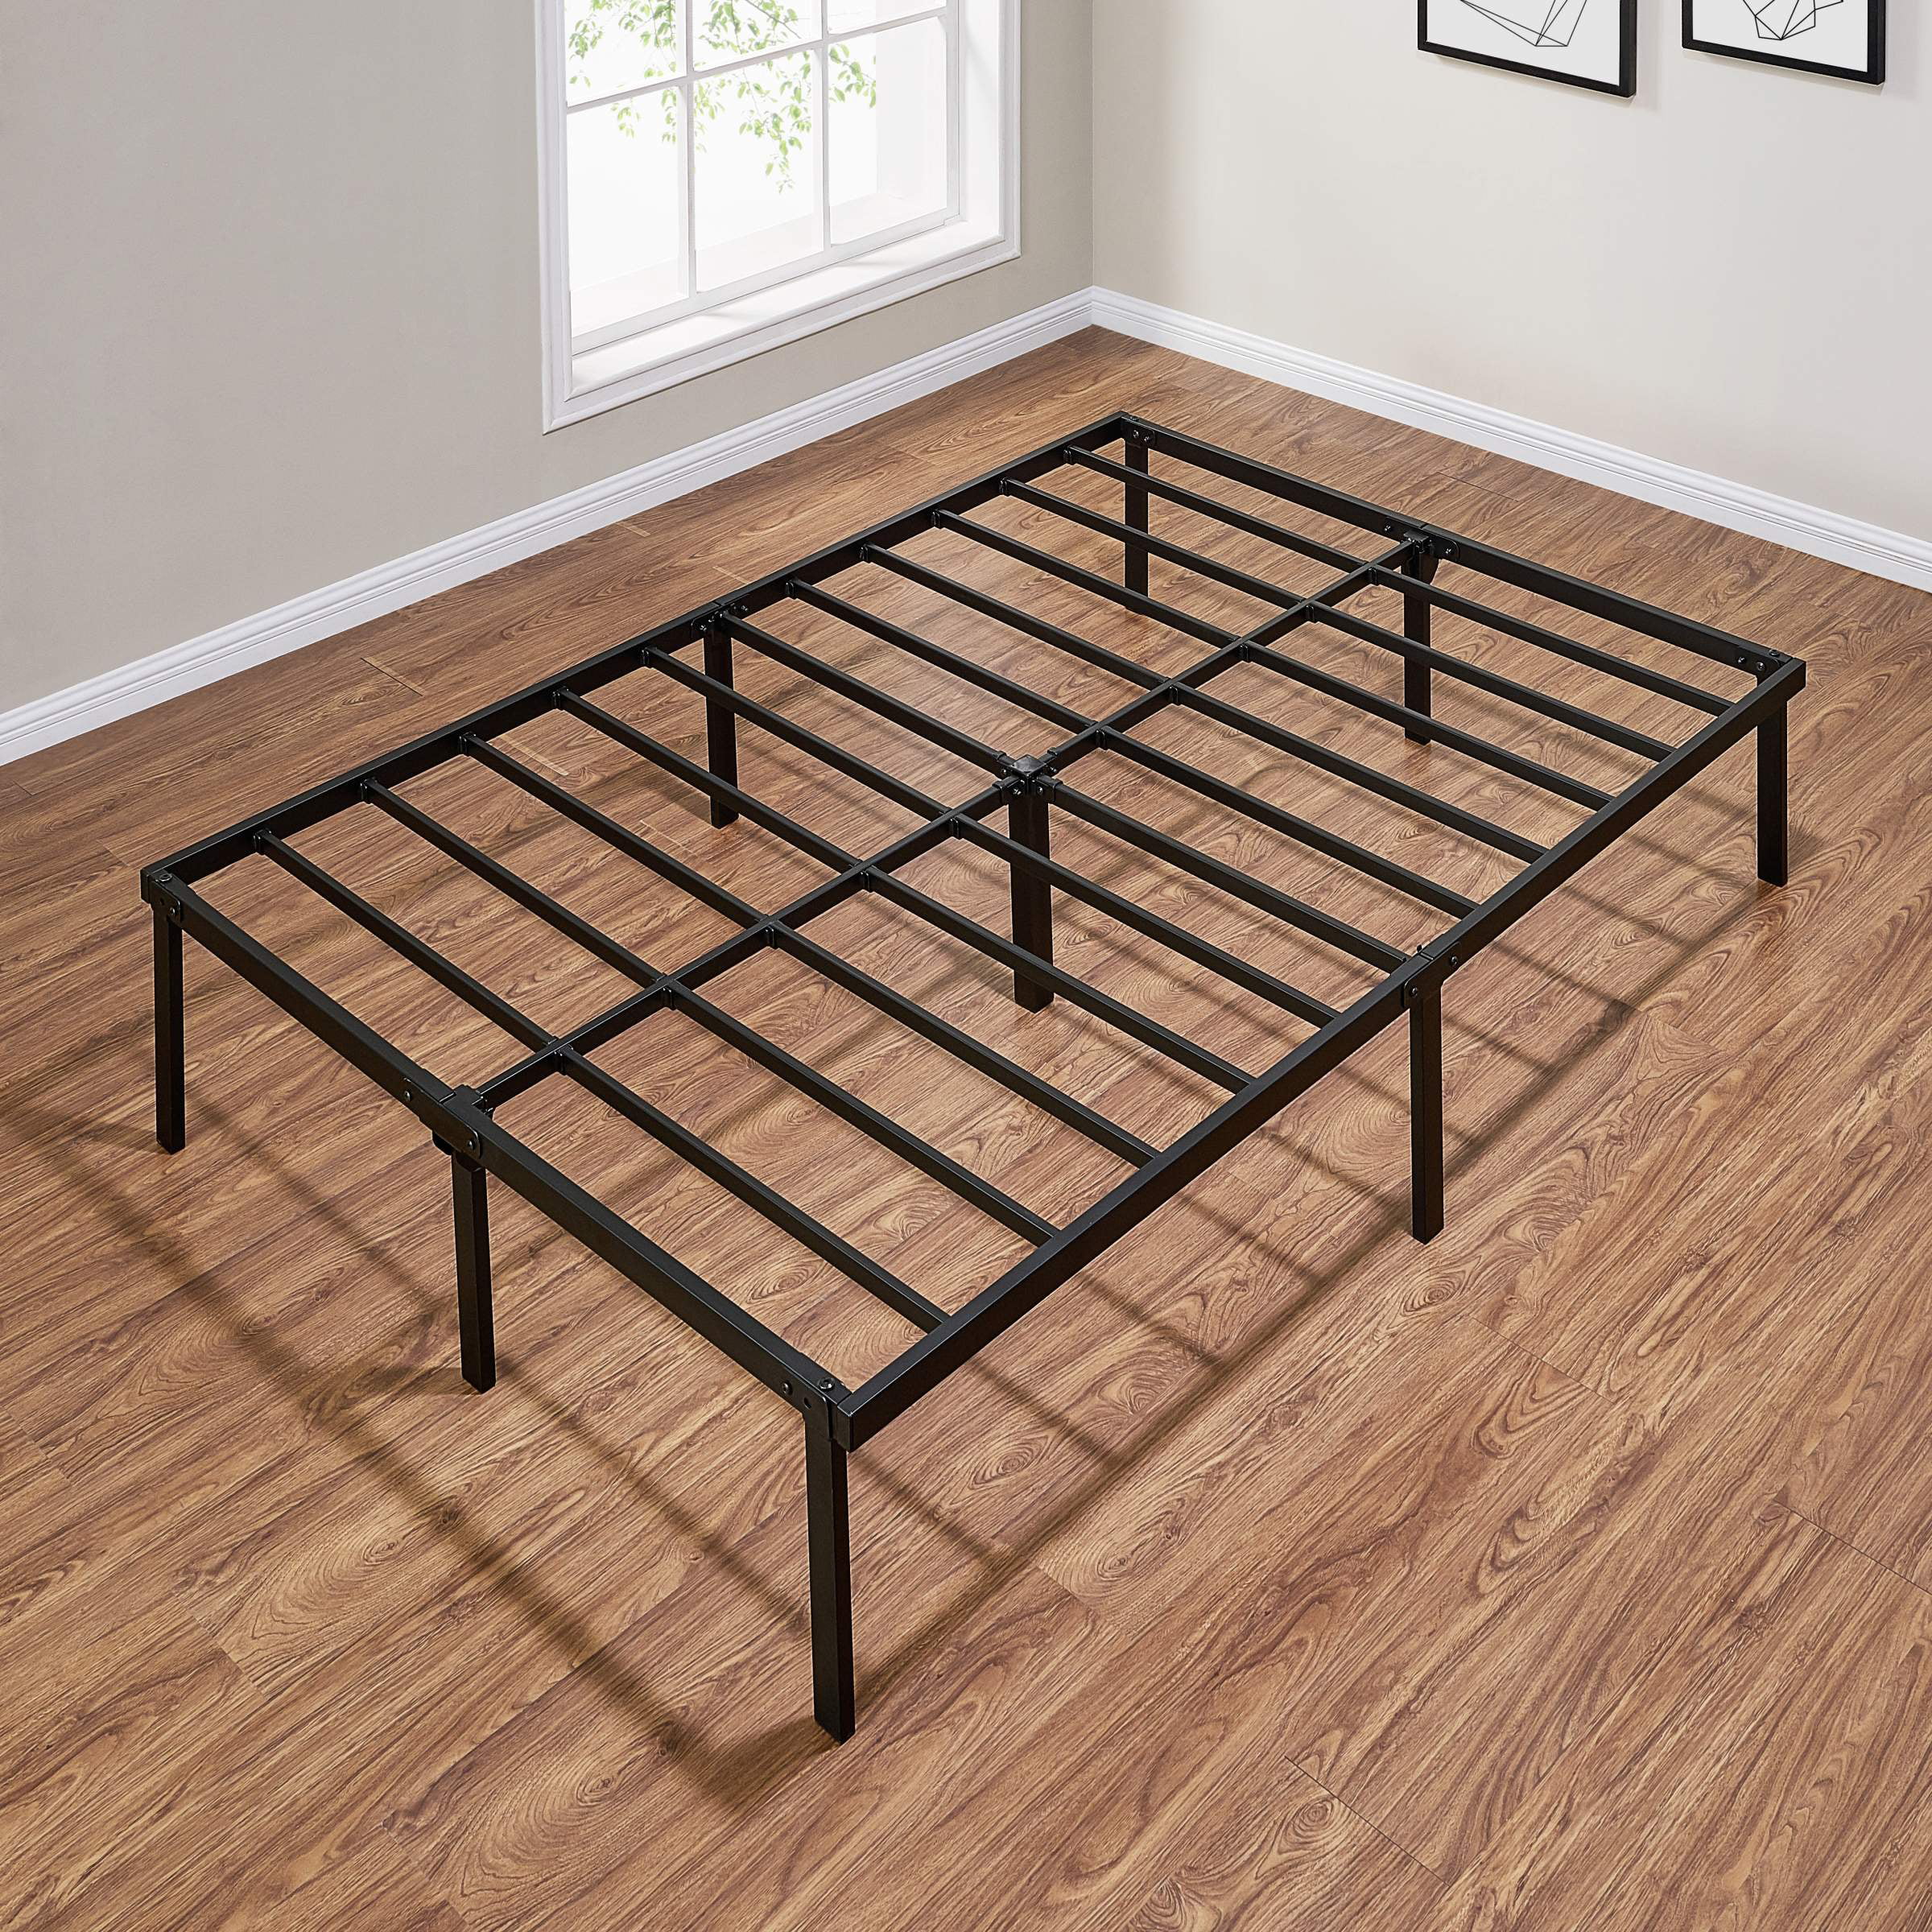 Mainstays 14 Heavy Duty Slat Bed Frame, Mainstays 12 Adjustable Metal Bed Frame White Twin King